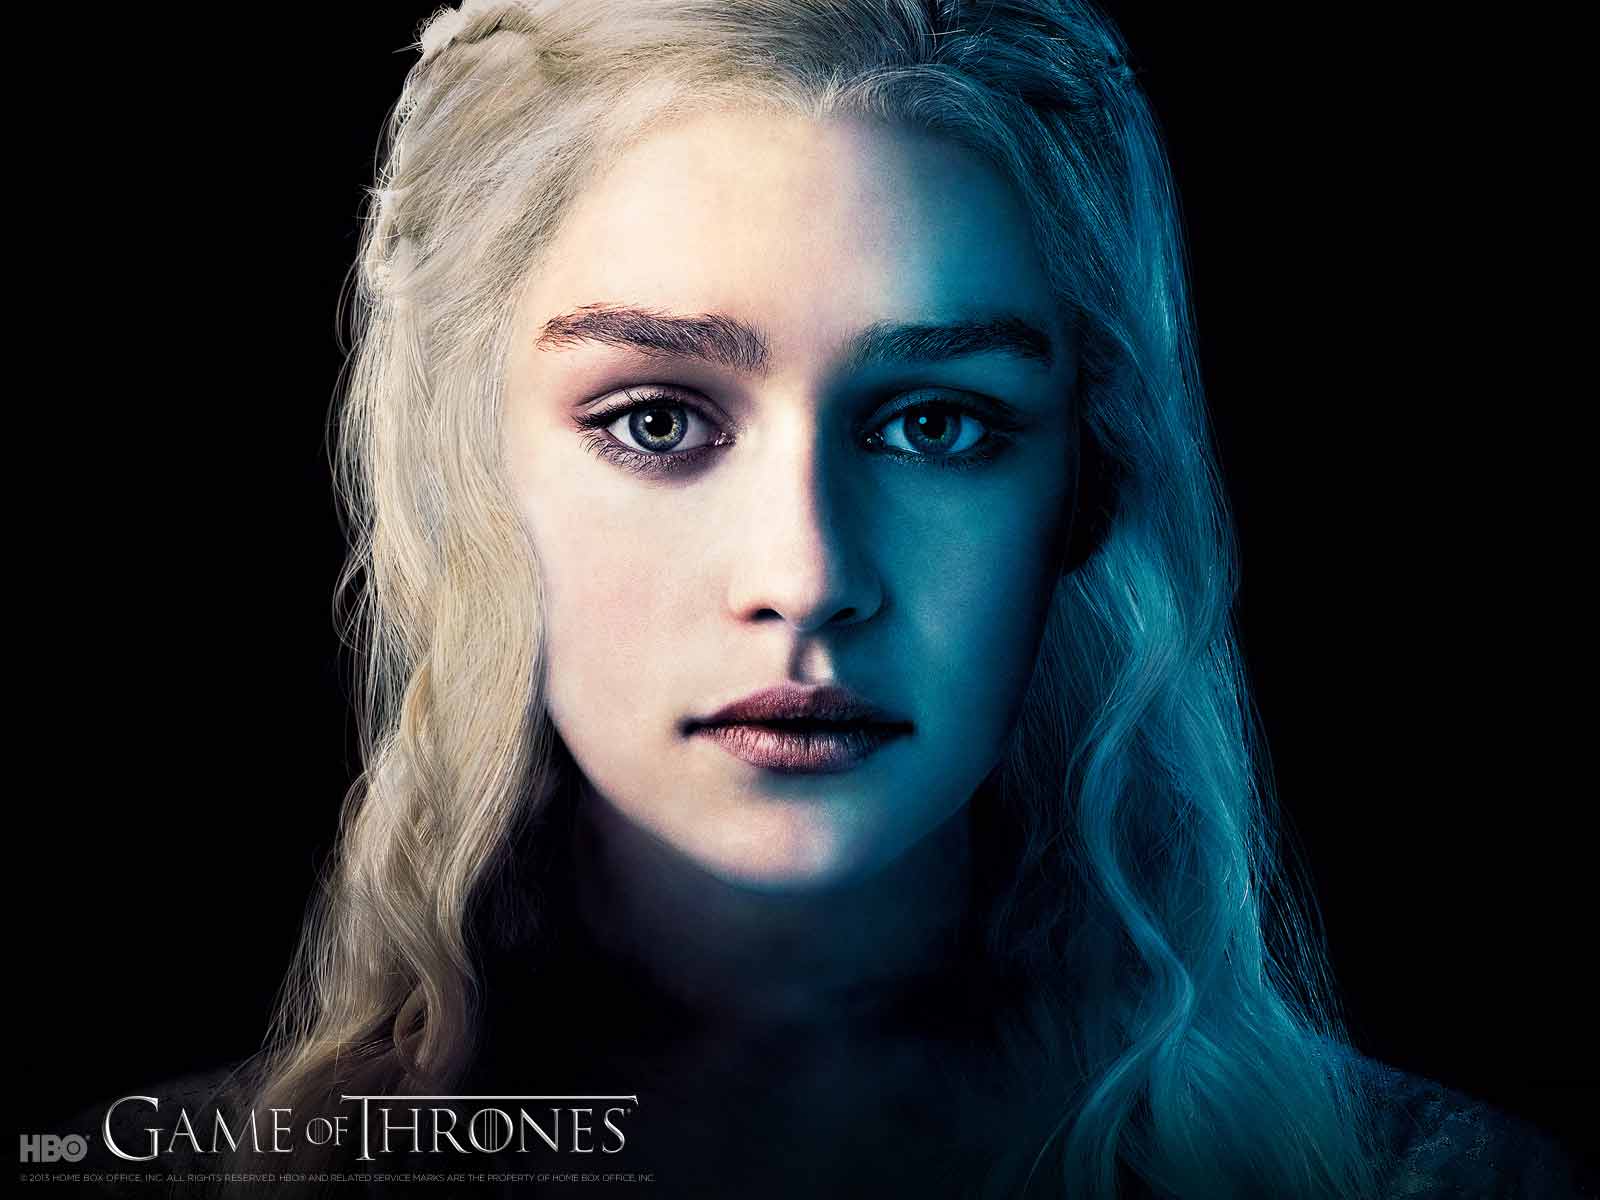  Wallpapers Backgrounds Game of Thrones Seasons 3 HD Wallpapers